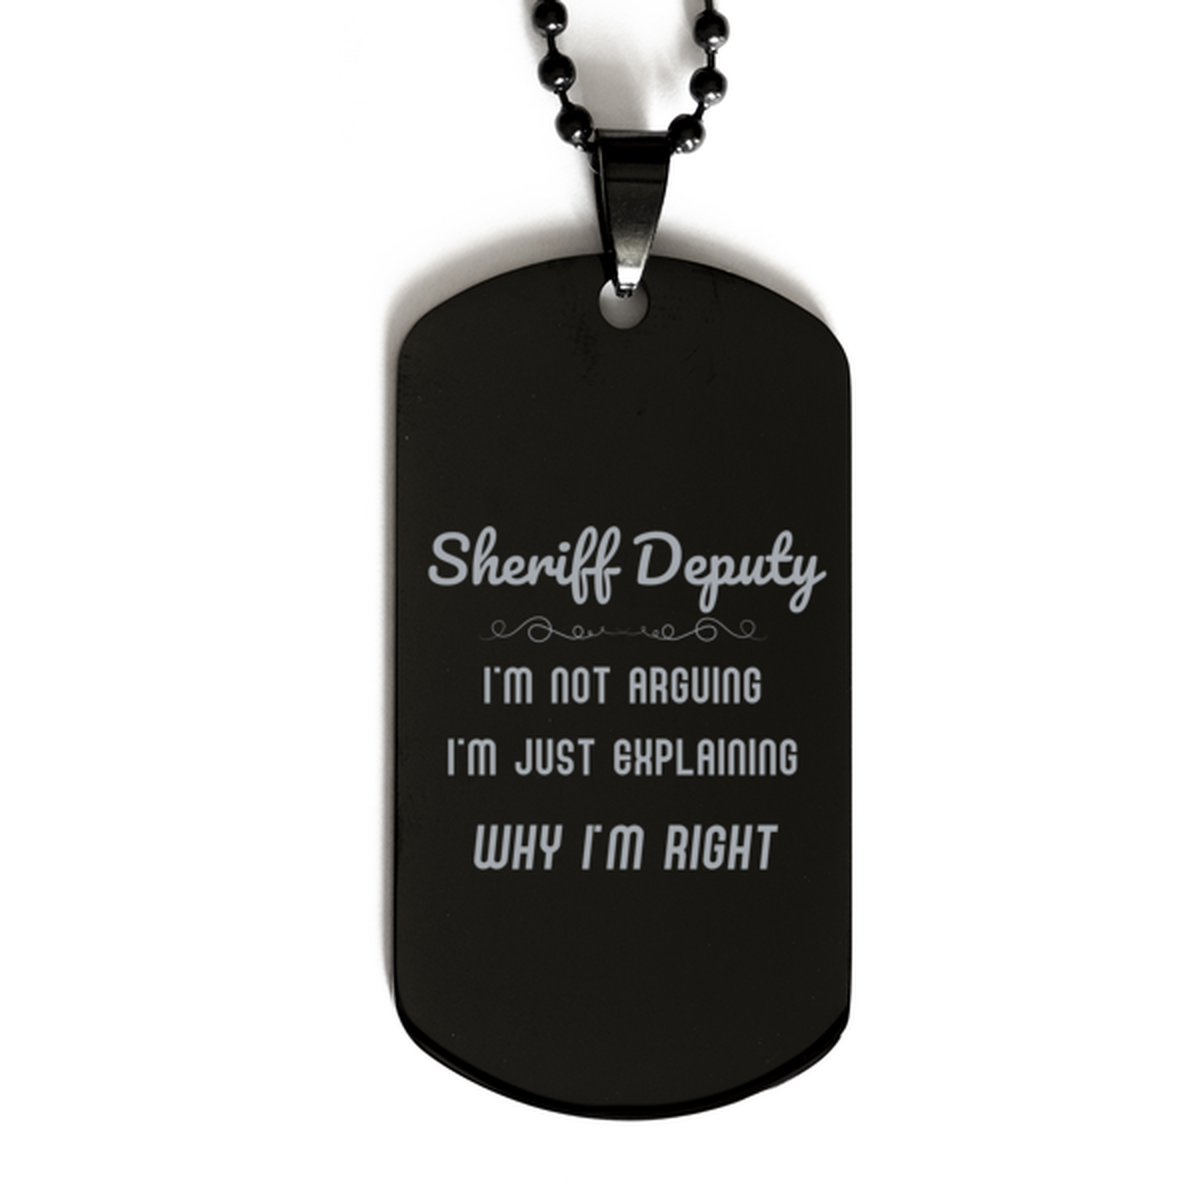 Sheriff Deputy I'm not Arguing. I'm Just Explaining Why I'm RIGHT Black Dog Tag, Funny Saying Quote Sheriff Deputy Gifts For Sheriff Deputy Graduation Birthday Christmas Gifts for Men Women Coworker